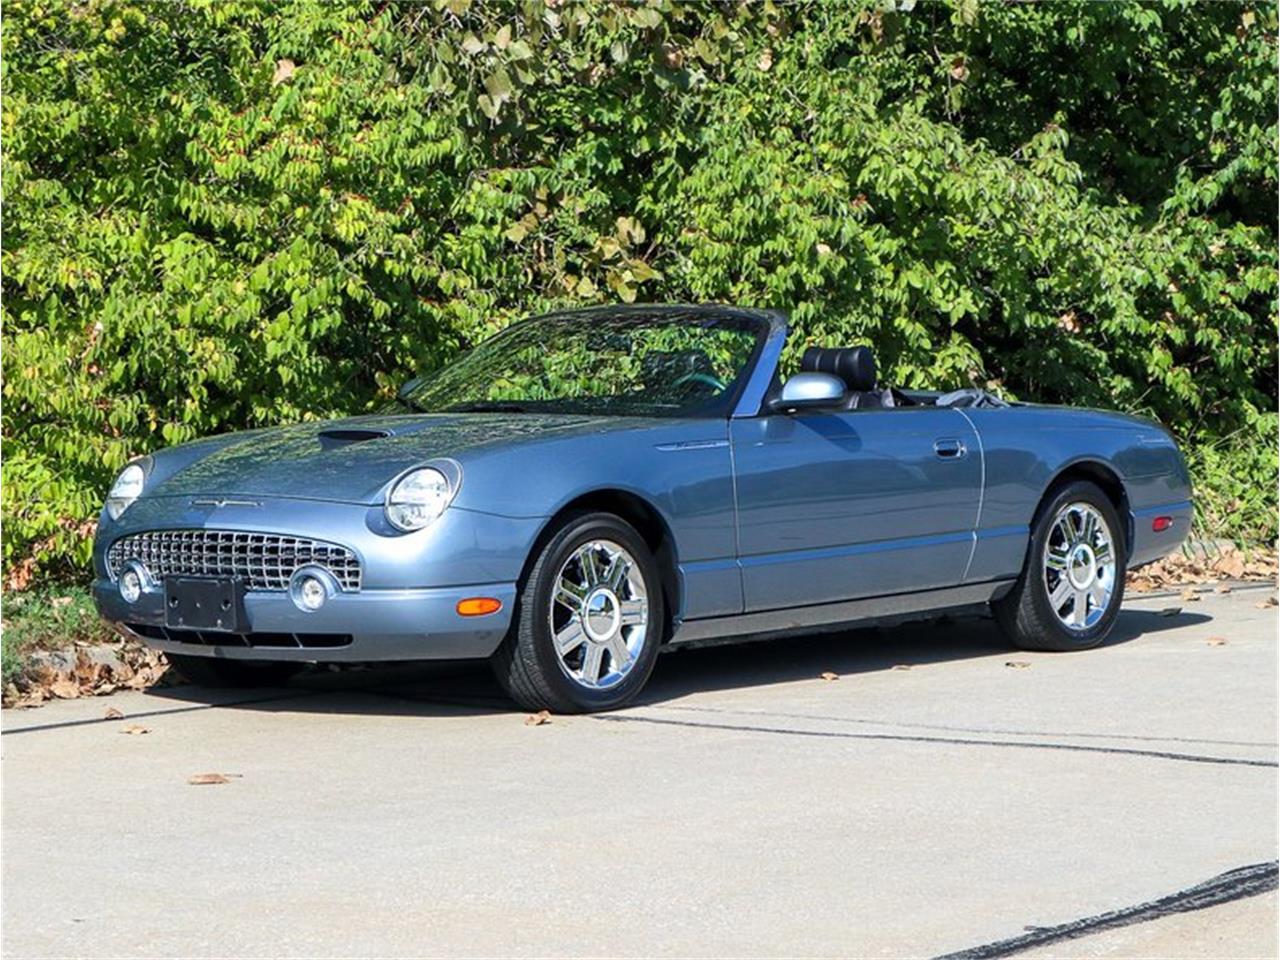 2002 to 2005 ford thunderbird for sale